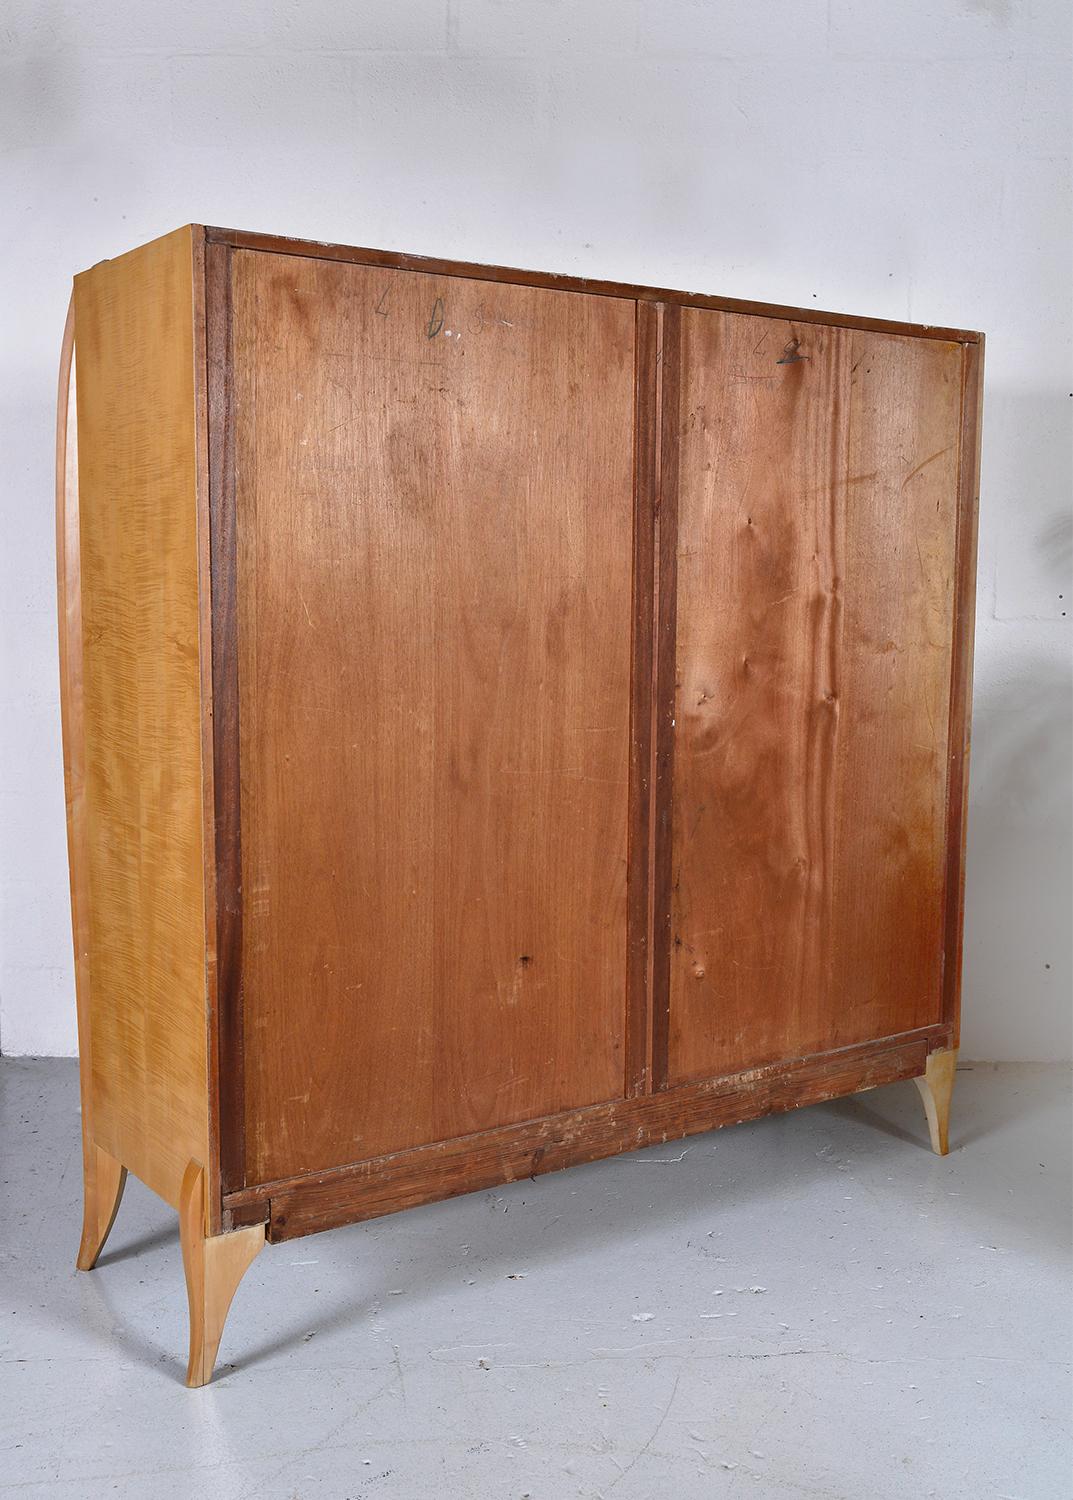 French Editions AV Burr Maple Wardrobe with Mirror Panel, 1940's For Sale 11